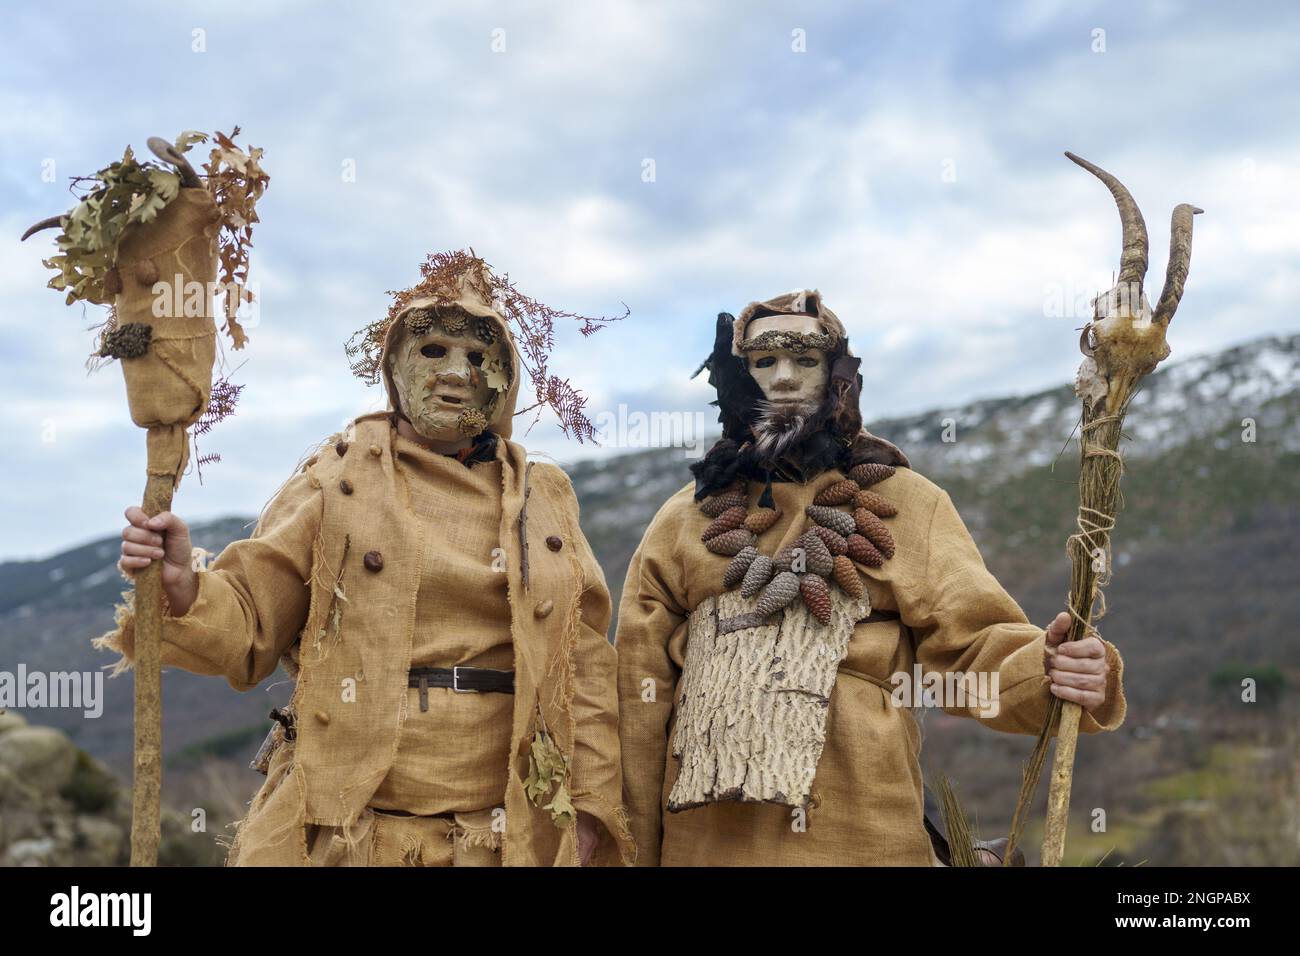 Navalacruz, Spain. 18th Feb, 2023. Carnival revellers dressed as traditional 'Harramacho' wearing leaves and other agricultural decor pose during a carnival festival in the village of Navalacruz, Spain, on Saturday, February 18, 2023. The 'Herramacho' figures, whose costumes are made from natural materials collected from the surrounding environment, were believed to protect family and cattle in pre-Roman rituals. Photo by Paul Hanna/UPI Credit: UPI/Alamy Live News Stock Photo